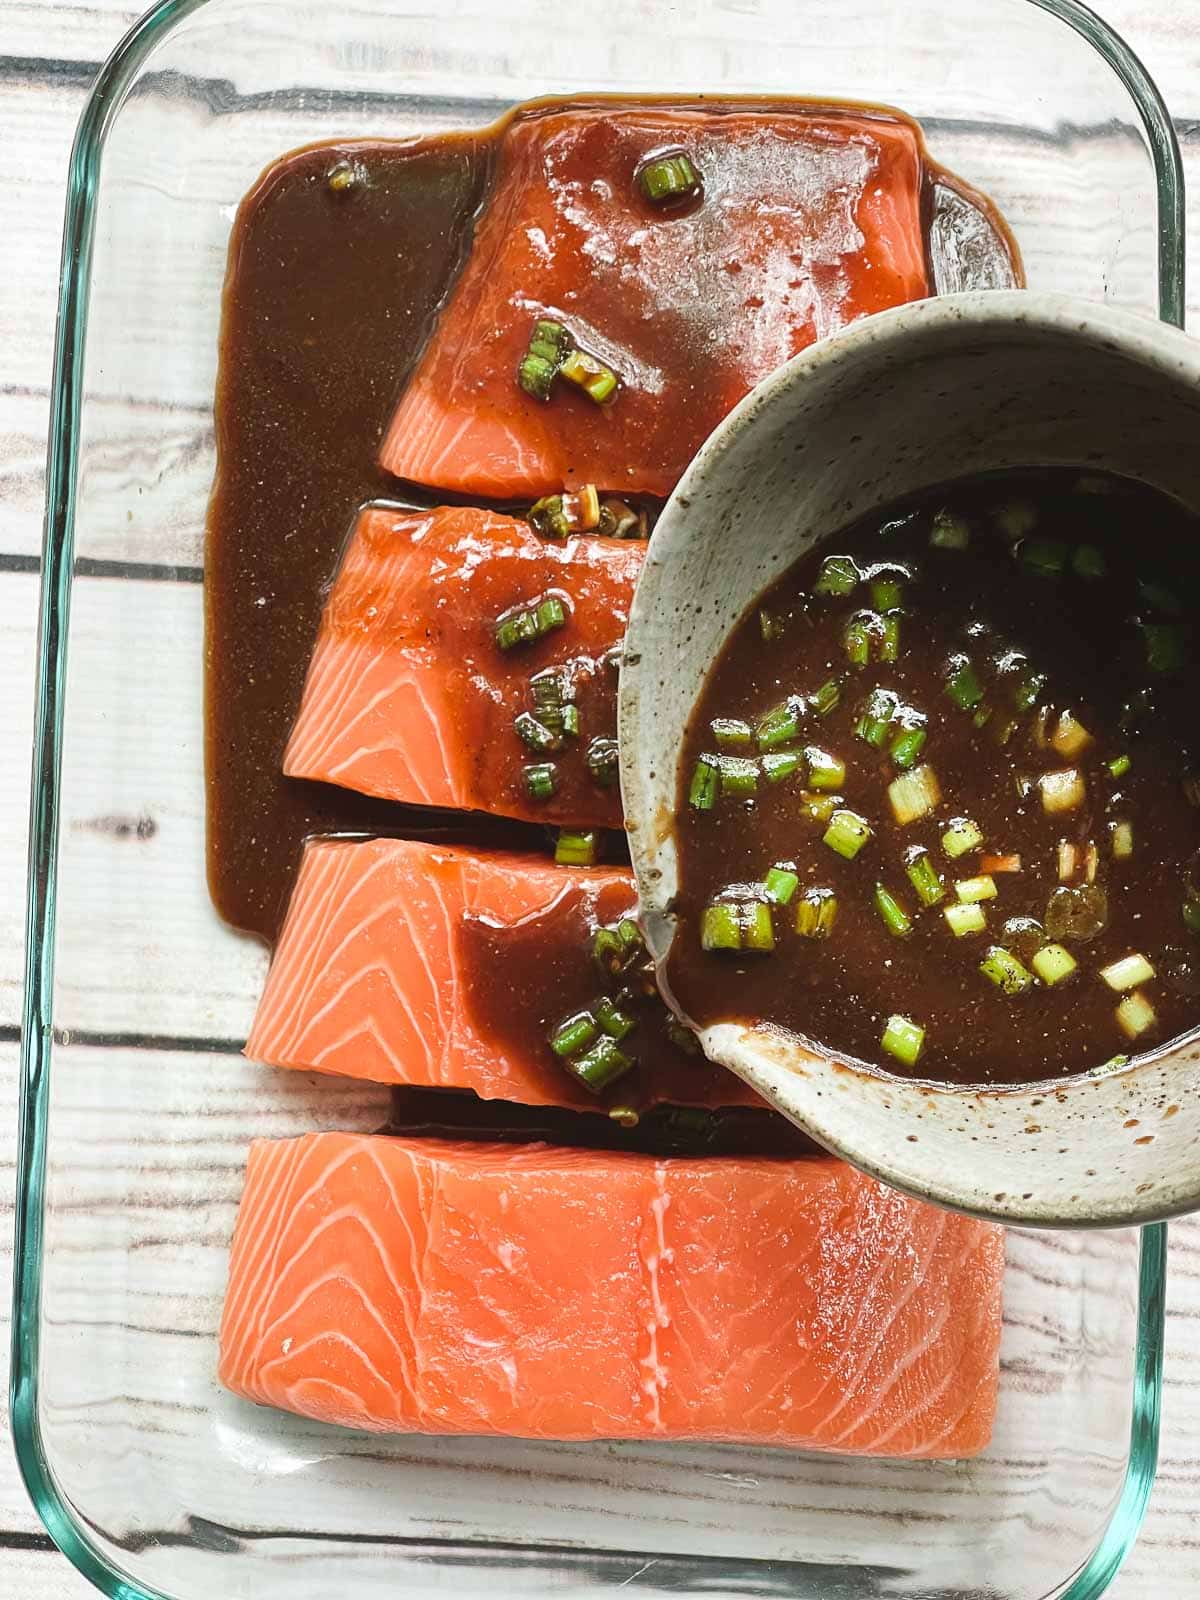 Pouring a miso marinade in a gray bowl on top of four raw salmon filets in a glass pyrex dish, on top of a white board.